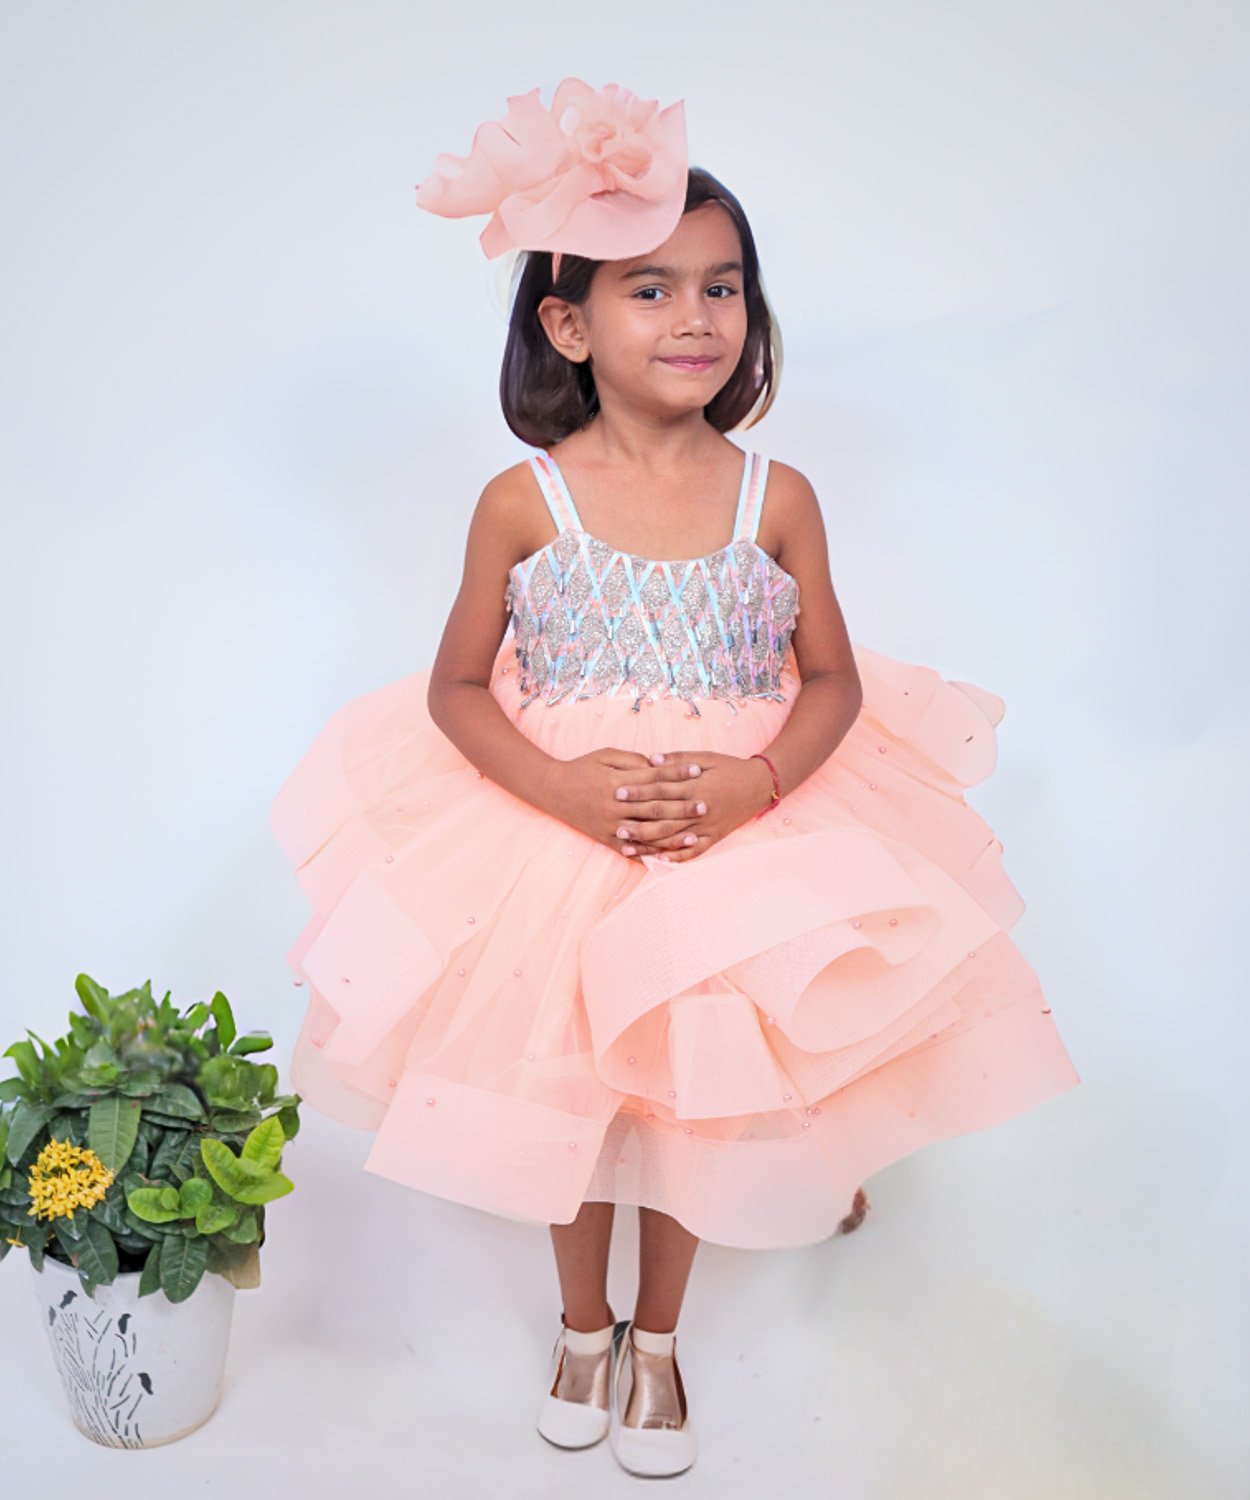 Peach Frock With Sequined Bodice, Layered Skirt, And Matching Ruffled Headpiece.